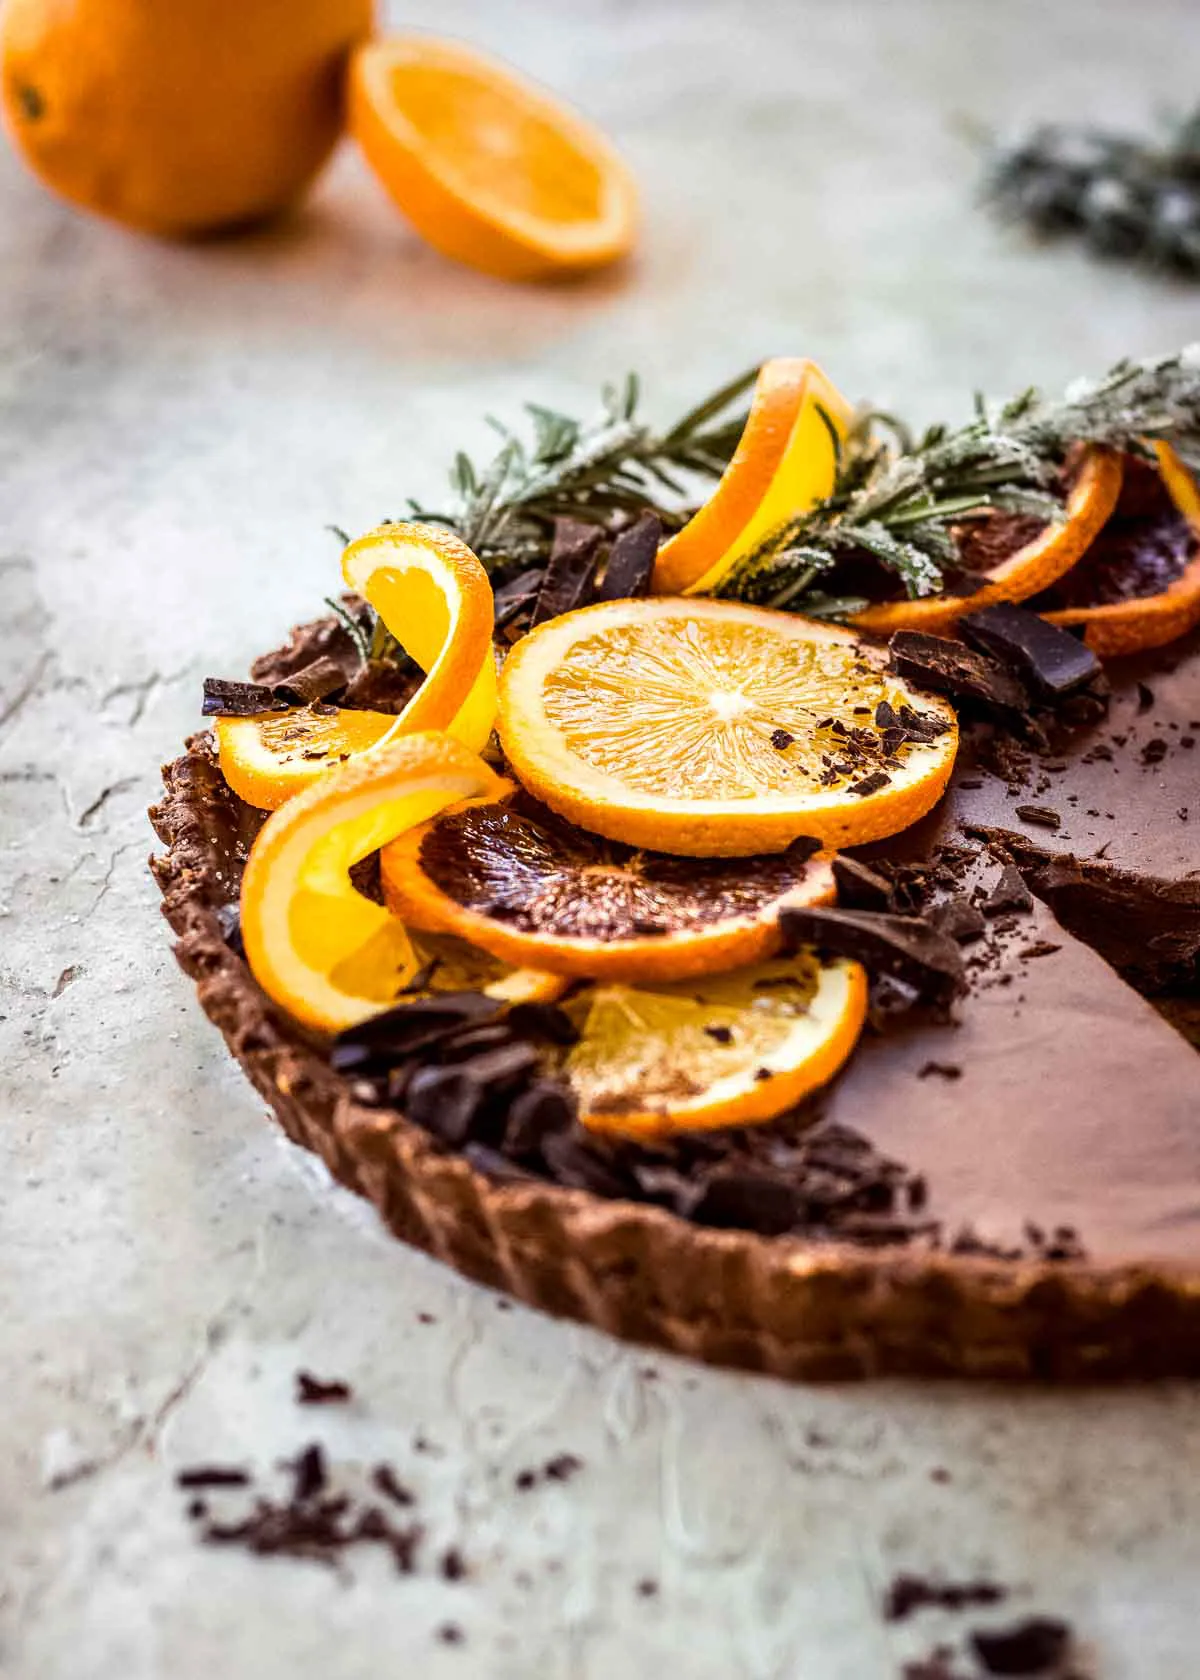 Closeup of chocolate and orange tart decorated with multicoloured orange slices and chocolate.